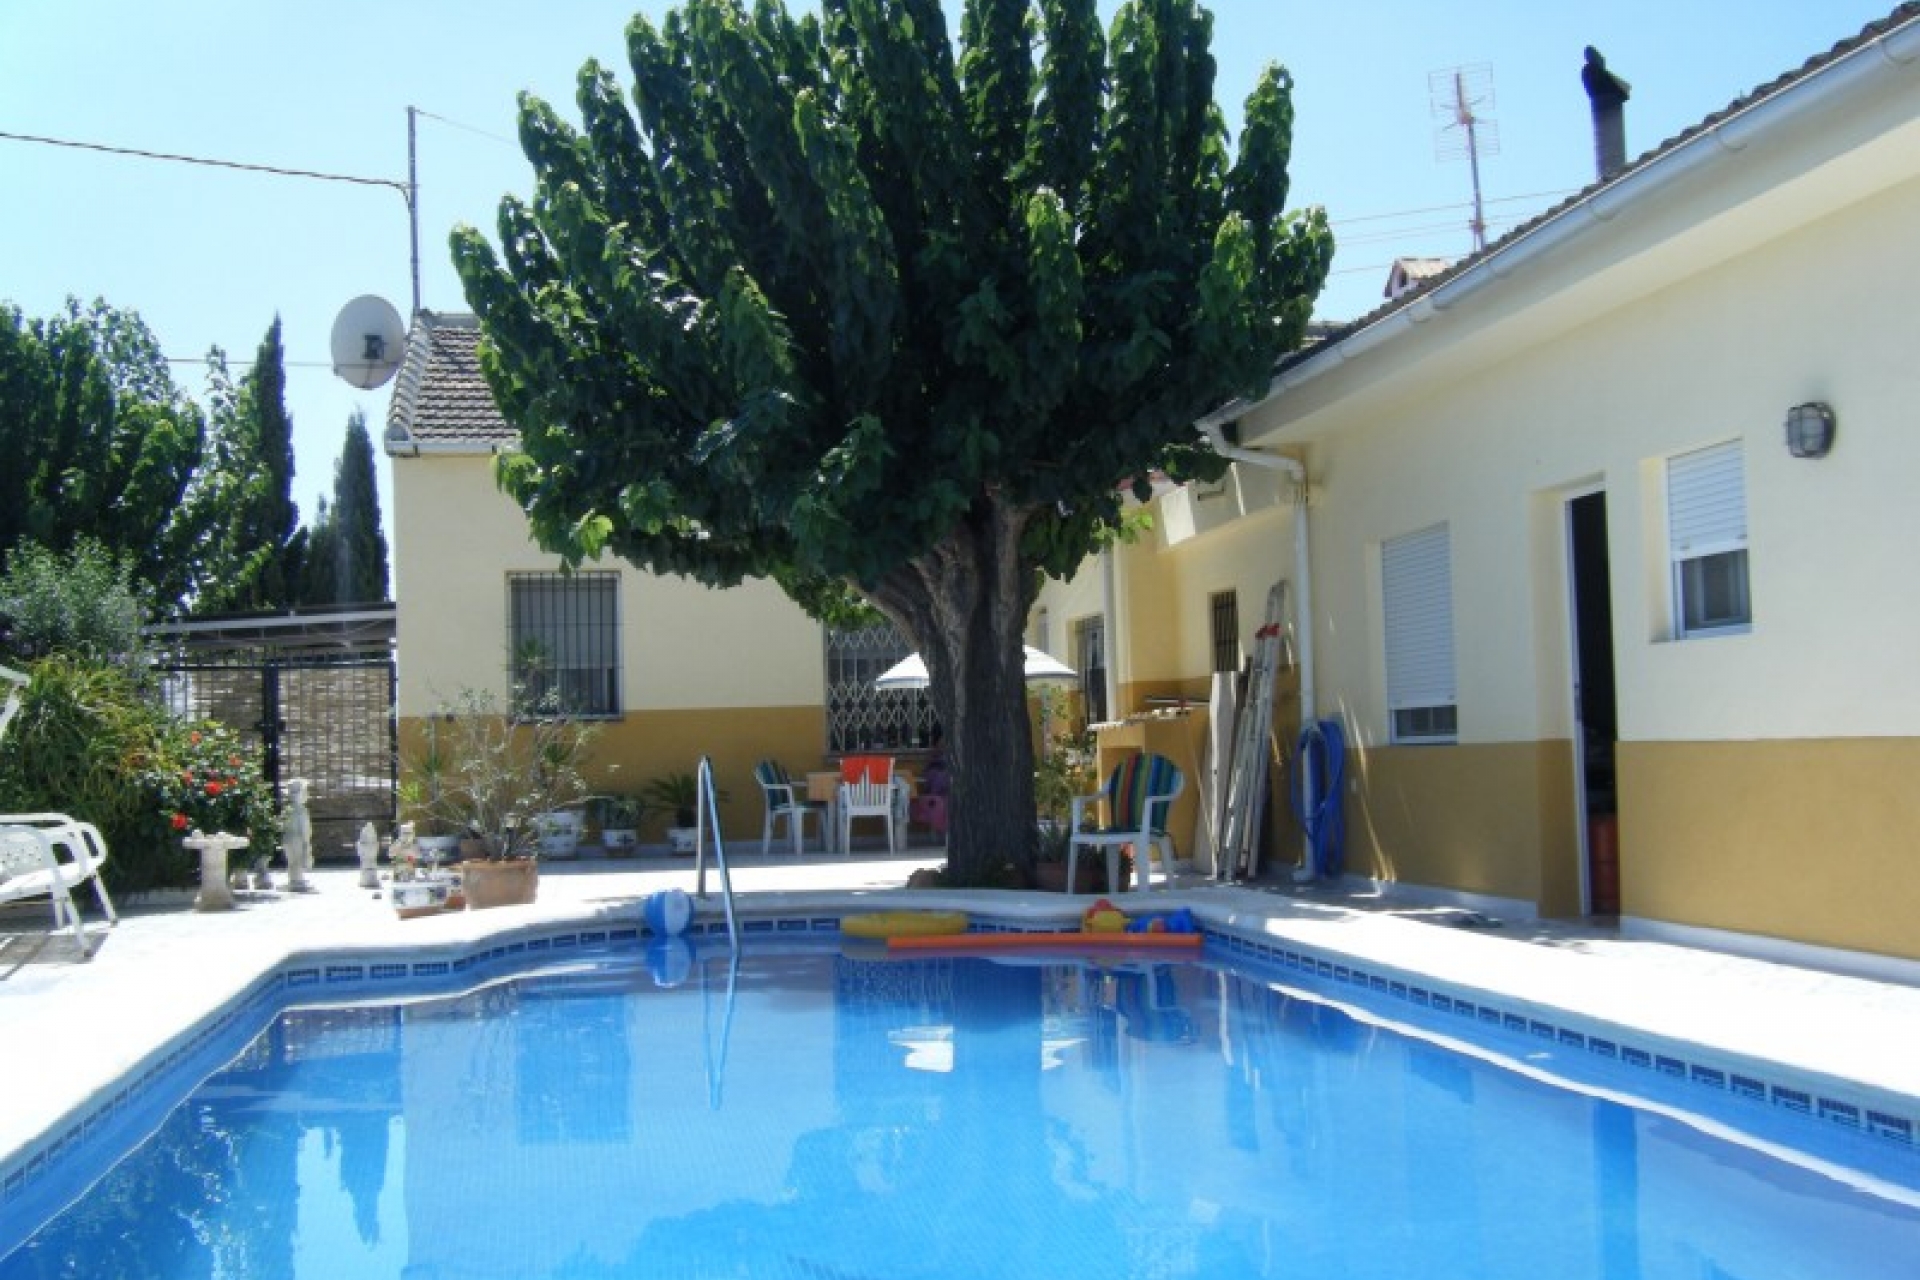 Daya Vieja for sale, cheap property bargain near Guardamar, Torrevieja and Quesada for sale on Spains Costa Blanca cheap.